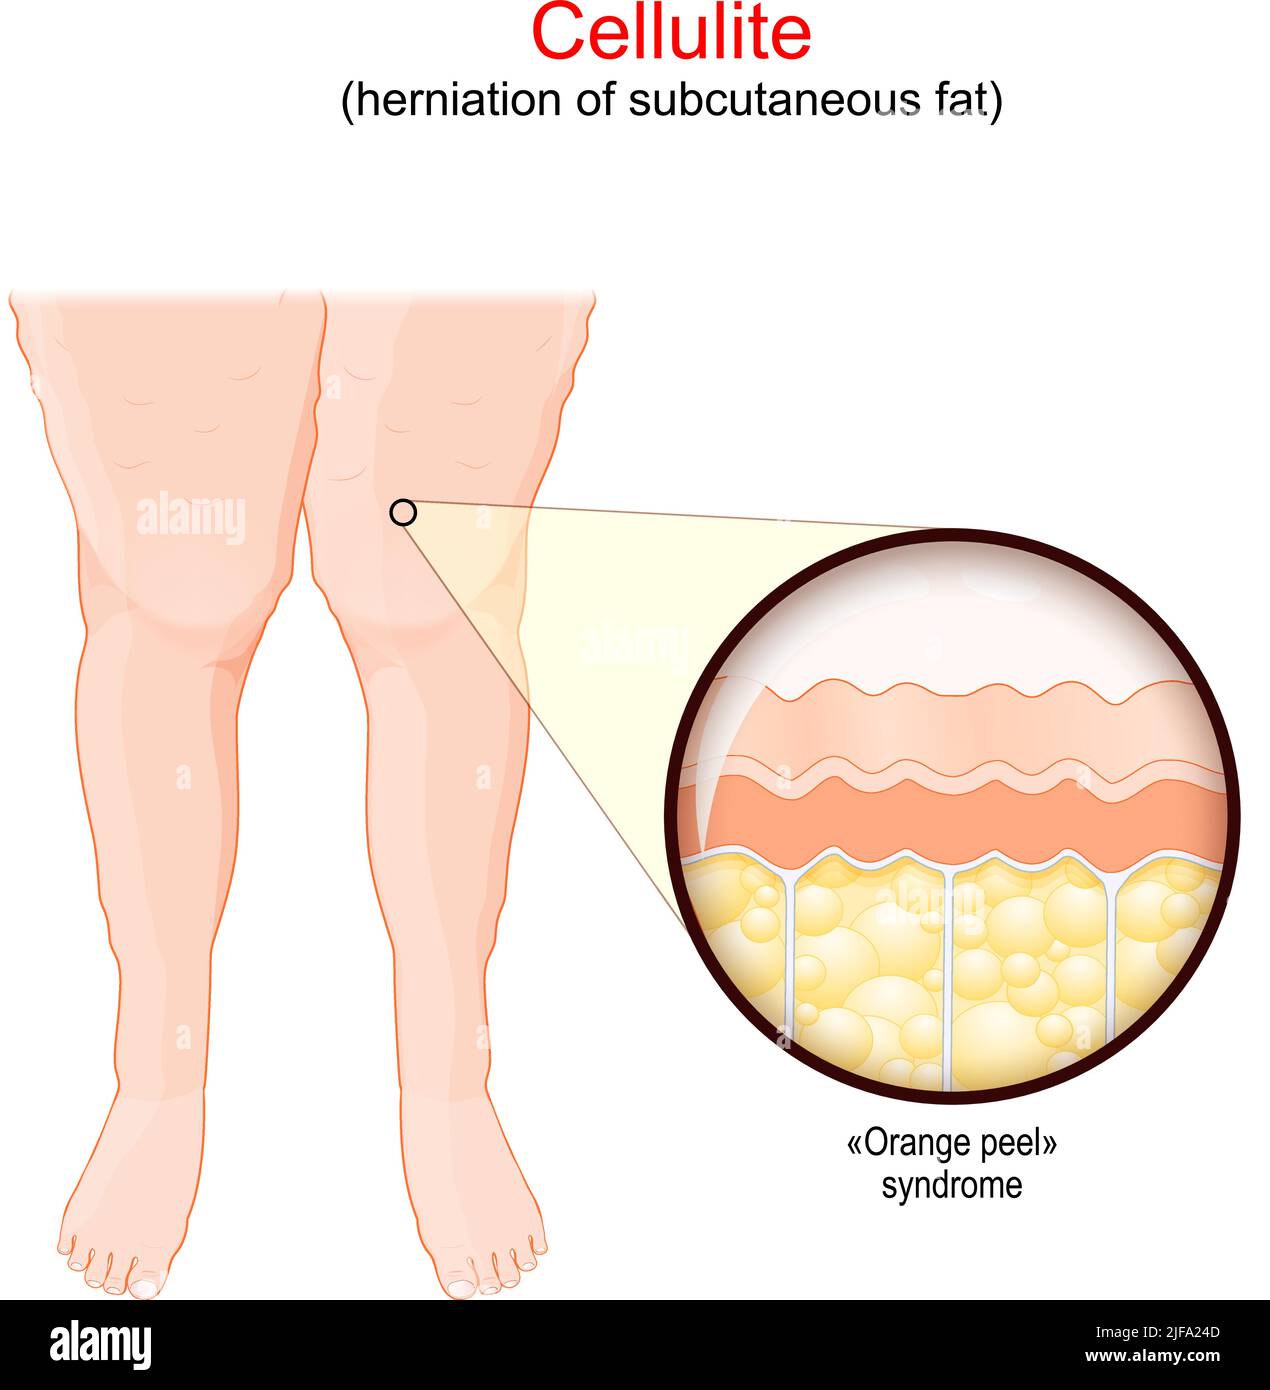 Cellulite. Females legs with Adiposis edematosa. Close-up of a human skin with Orange peel syndrome. herniation of subcutaneous fat. Vector Stock Vector